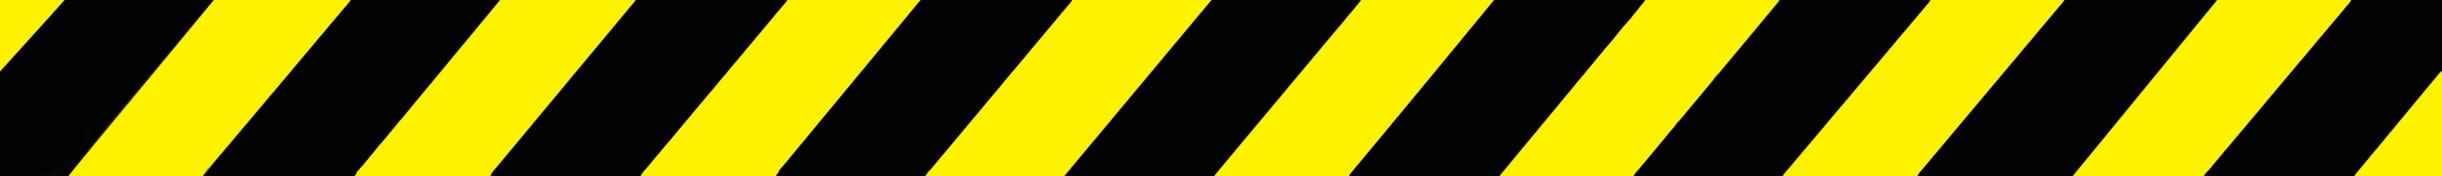 Black and Yellow Safety Strip